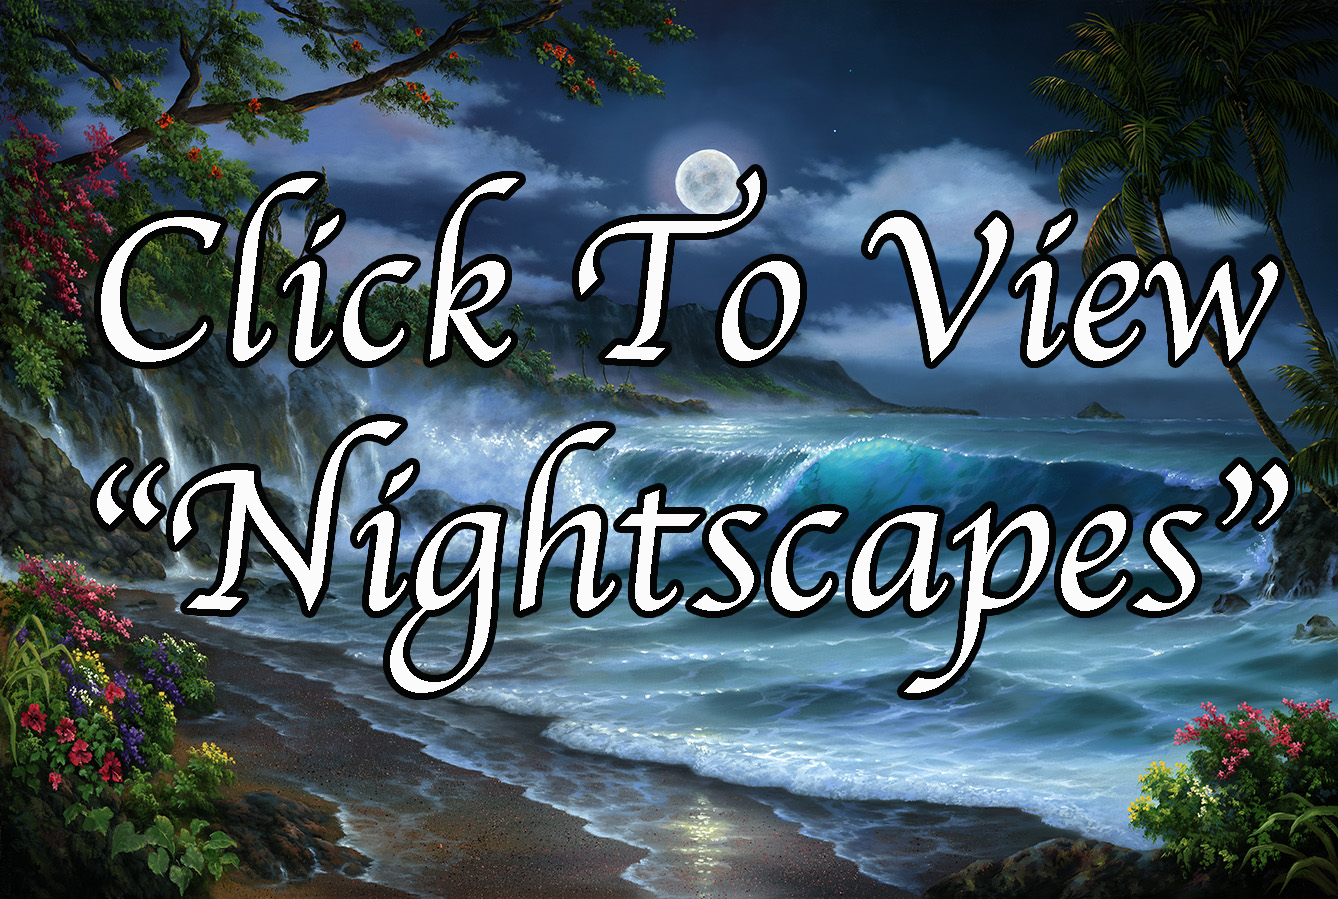 "Nightscapes"